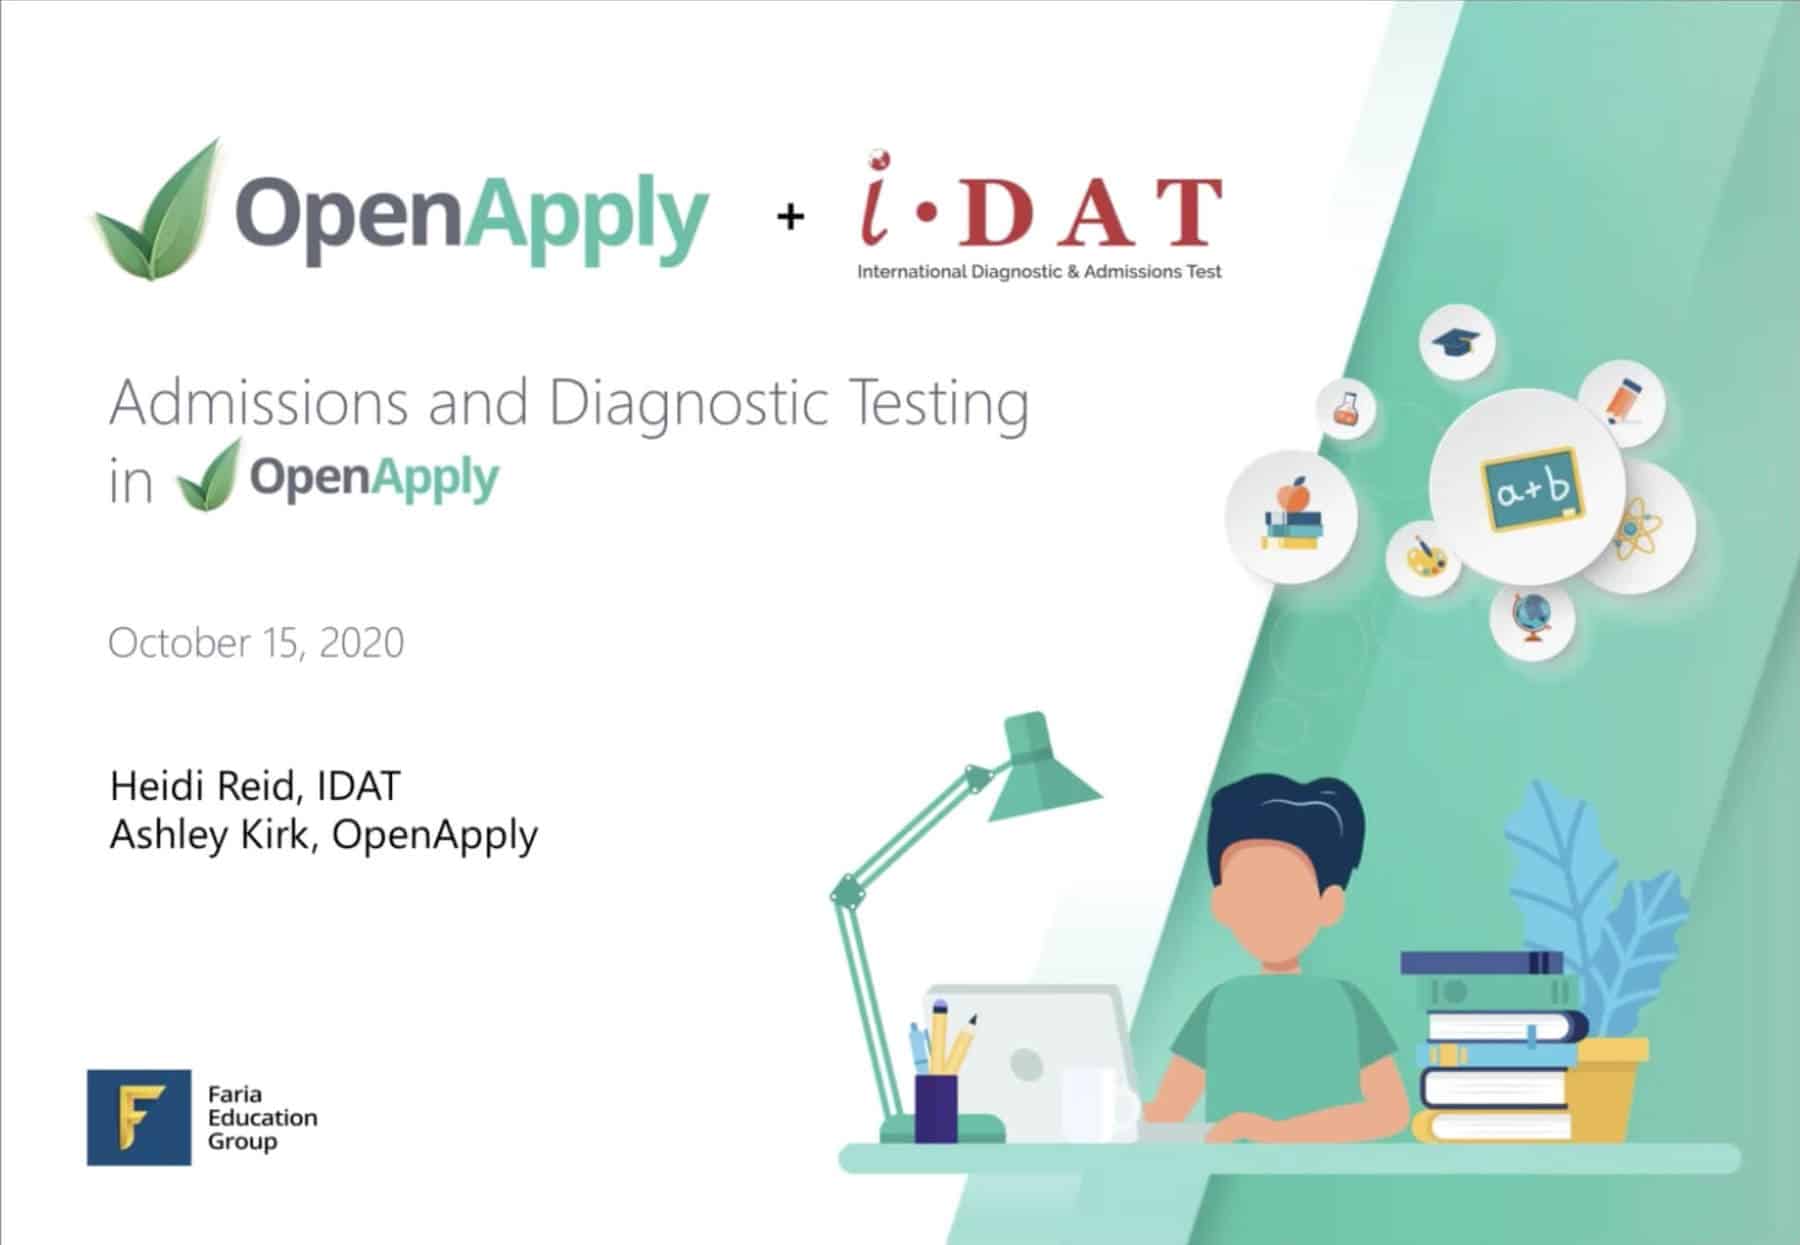 OpenApply & IDAT: Admissions and Diagnostic Testing